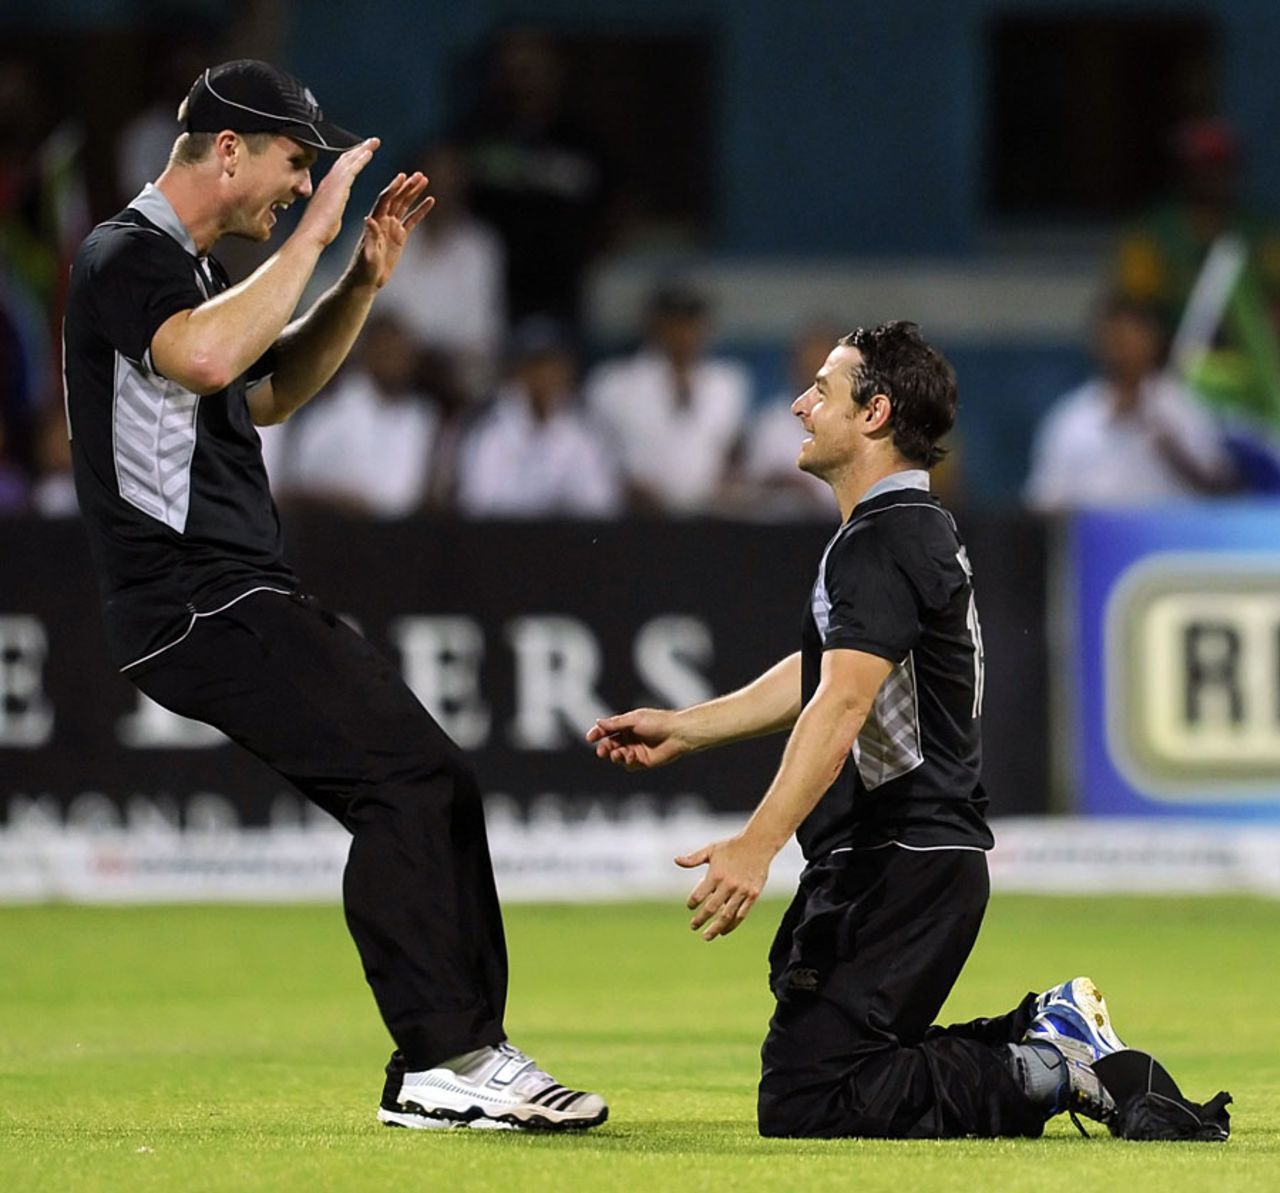 Nathan McCullum (right) was outstanding in the field, South Africa v New Zealand, 2nd ODI, Kimberley, January 22, 2013